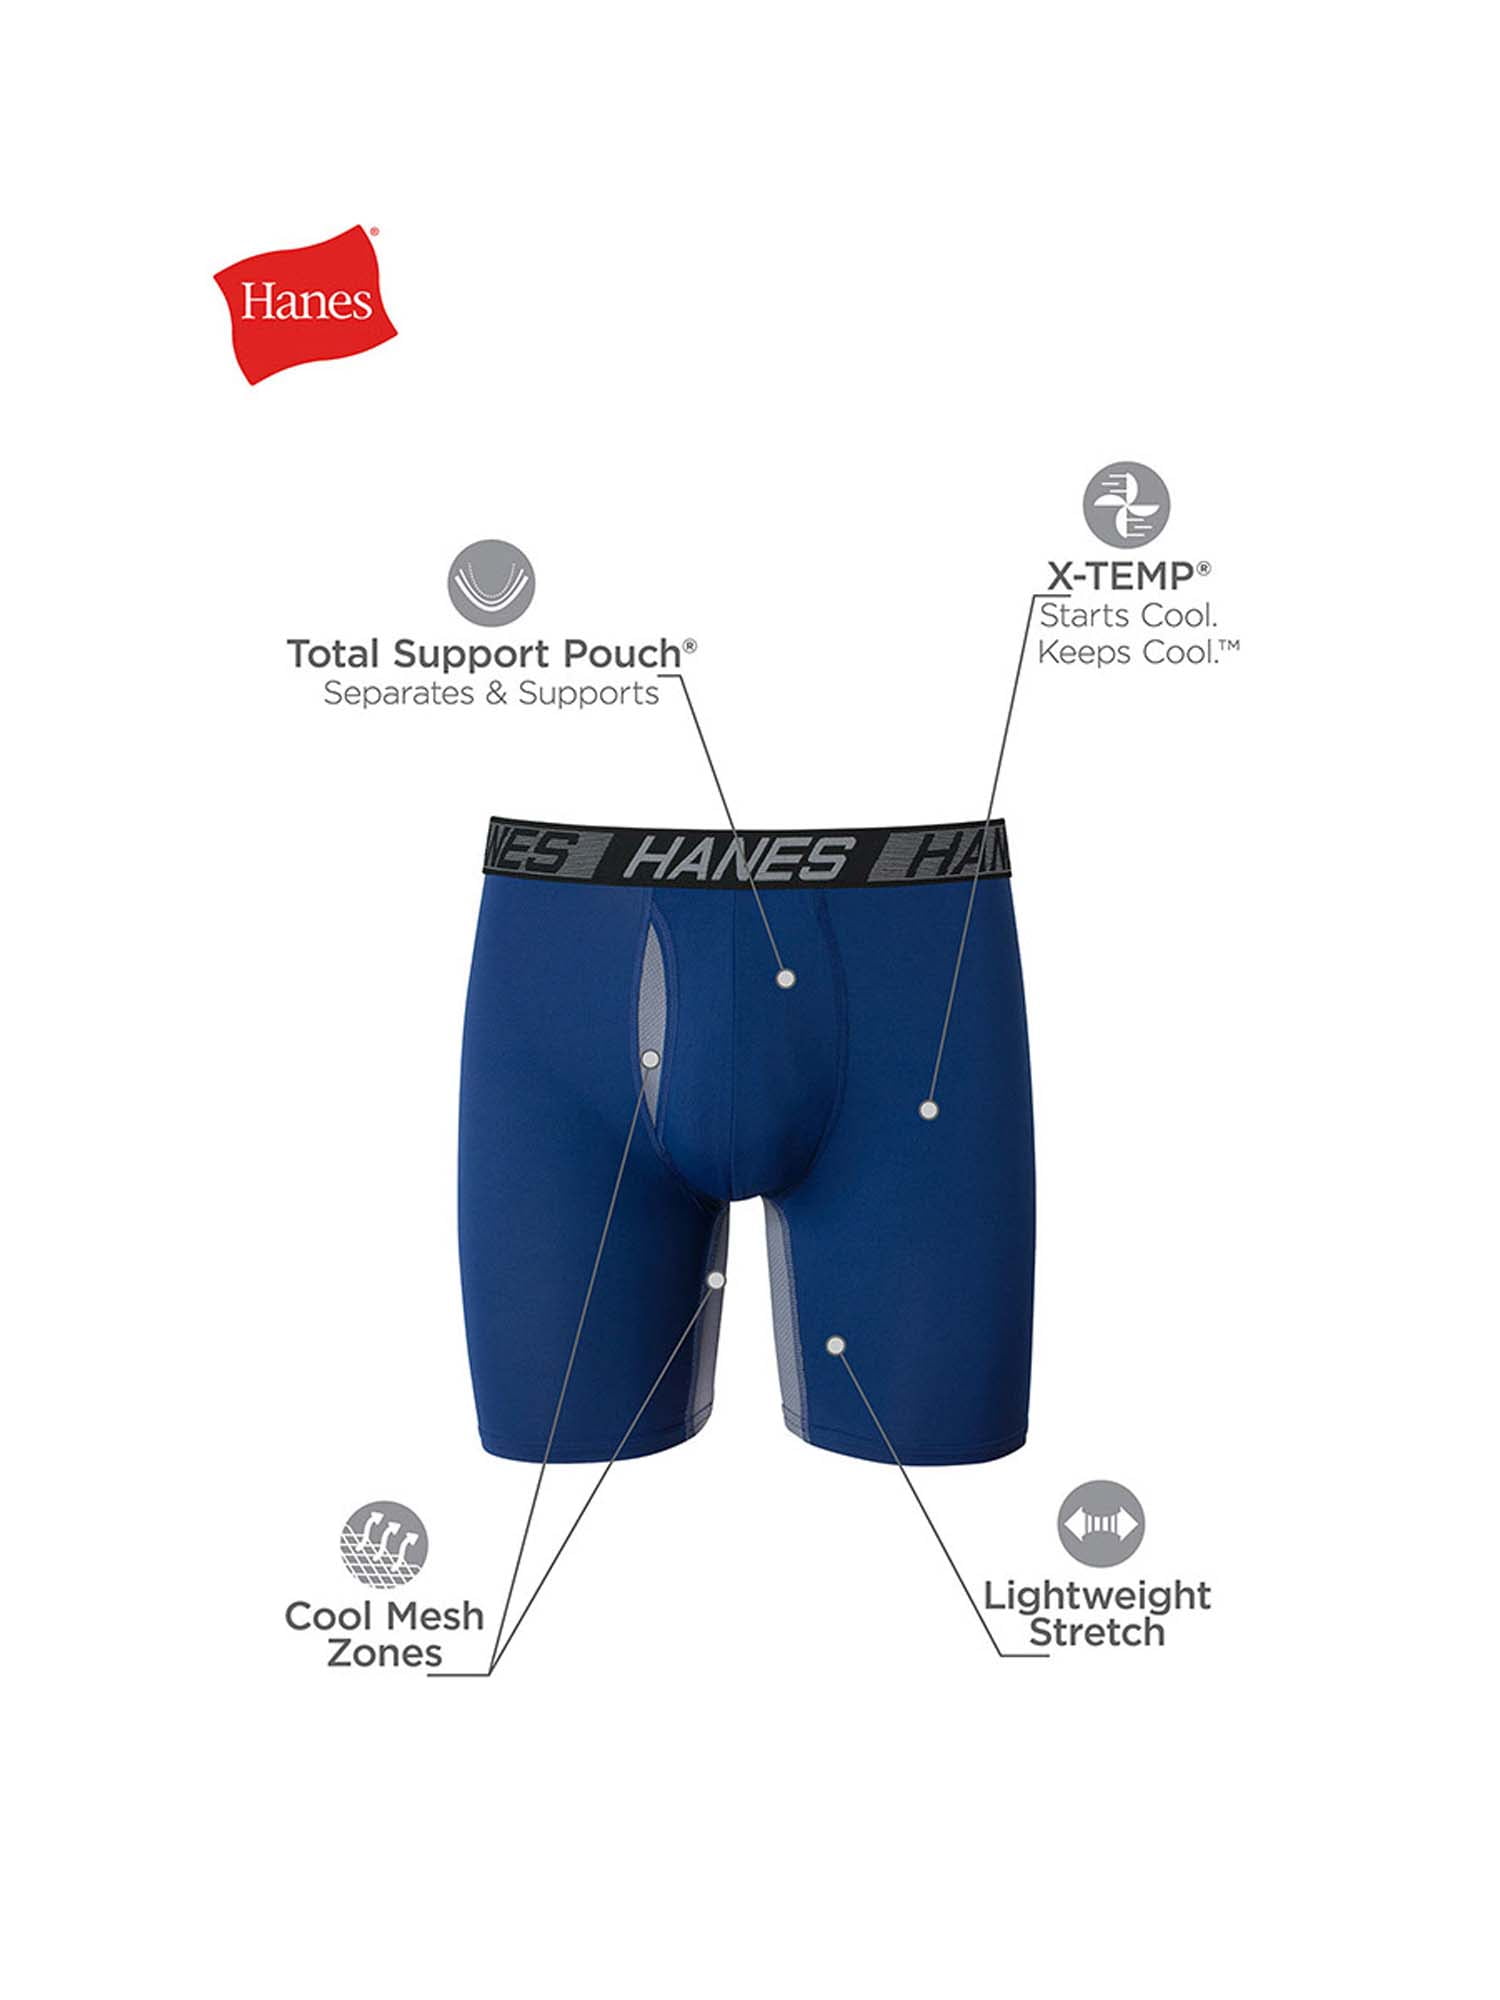 Hanes X-Temp Total Support Pouch Men's Long Leg Boxer Briefs, Anti-Chafing  Underwear, 3-Pack 